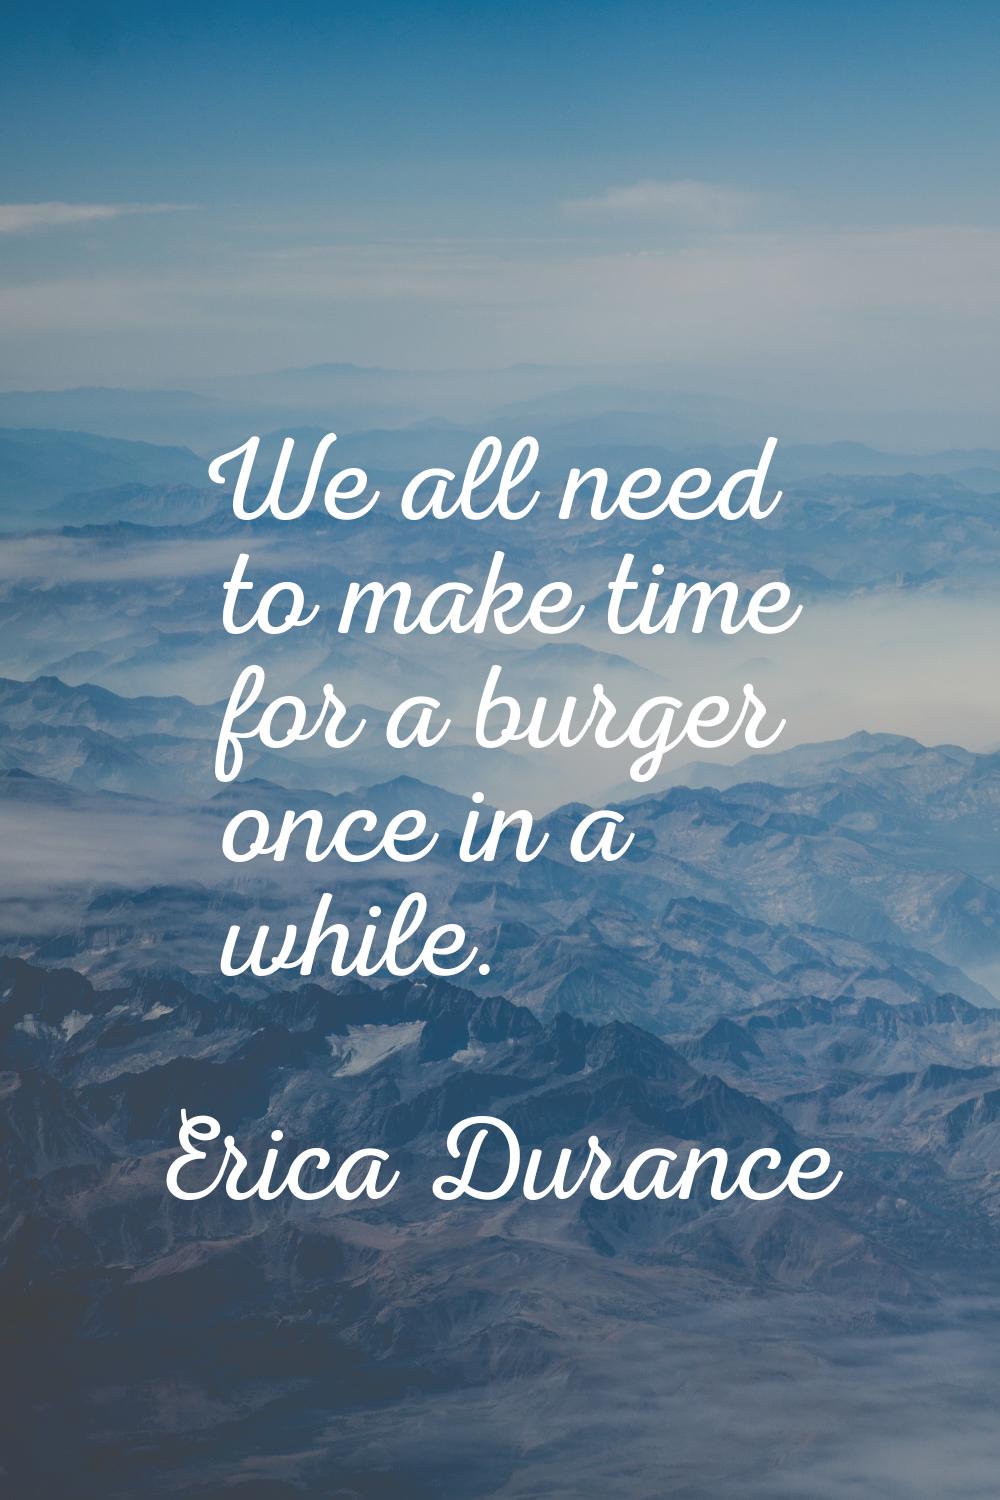 We all need to make time for a burger once in a while.